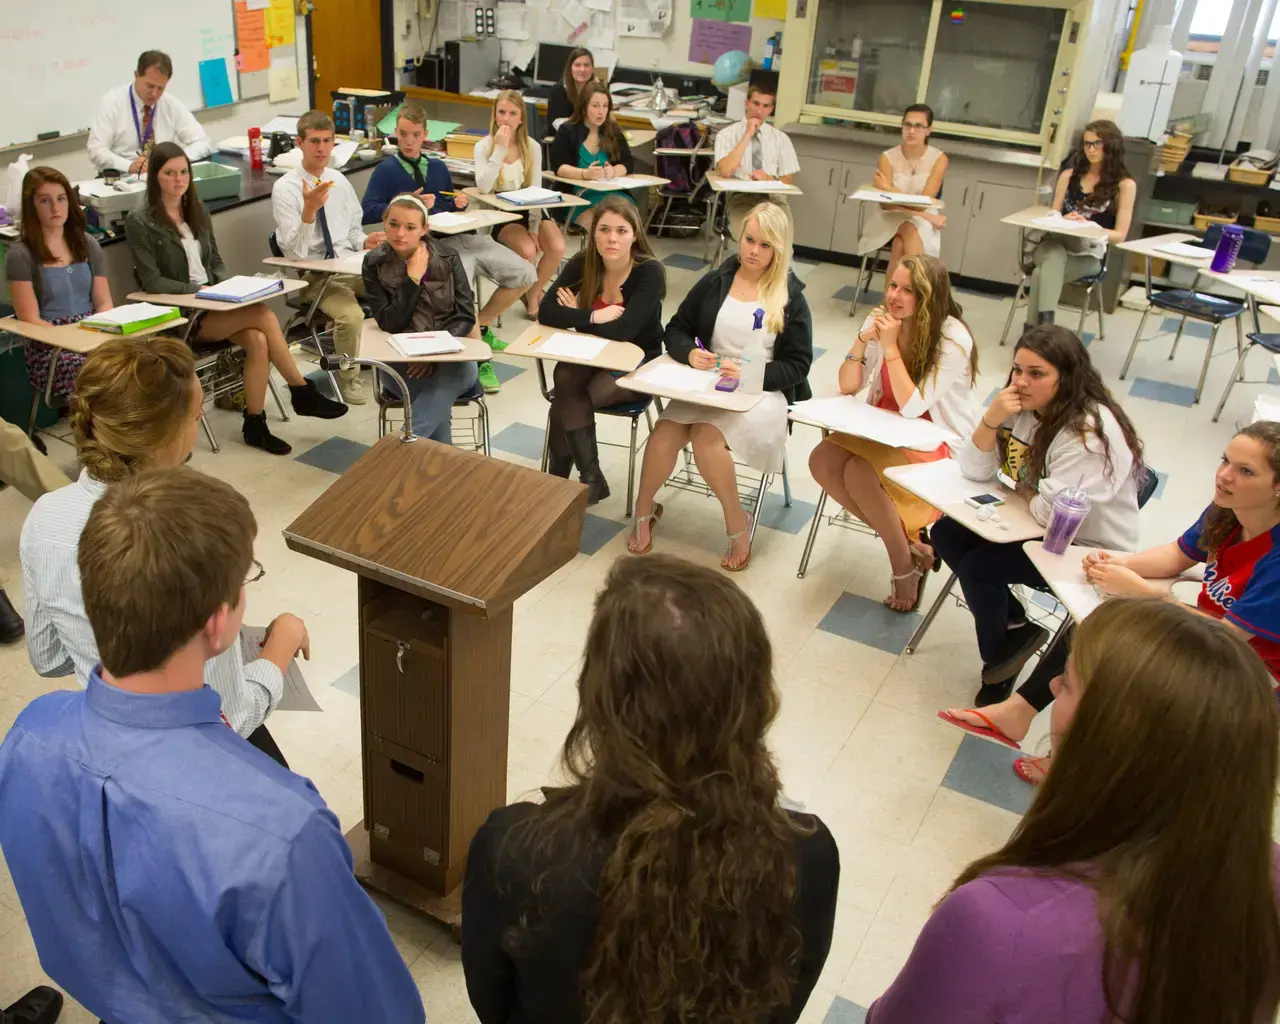 Palisades High School students during their second round debate. Photo by Conrad Erb, courtesy of the Chemical Heritage Foundation.